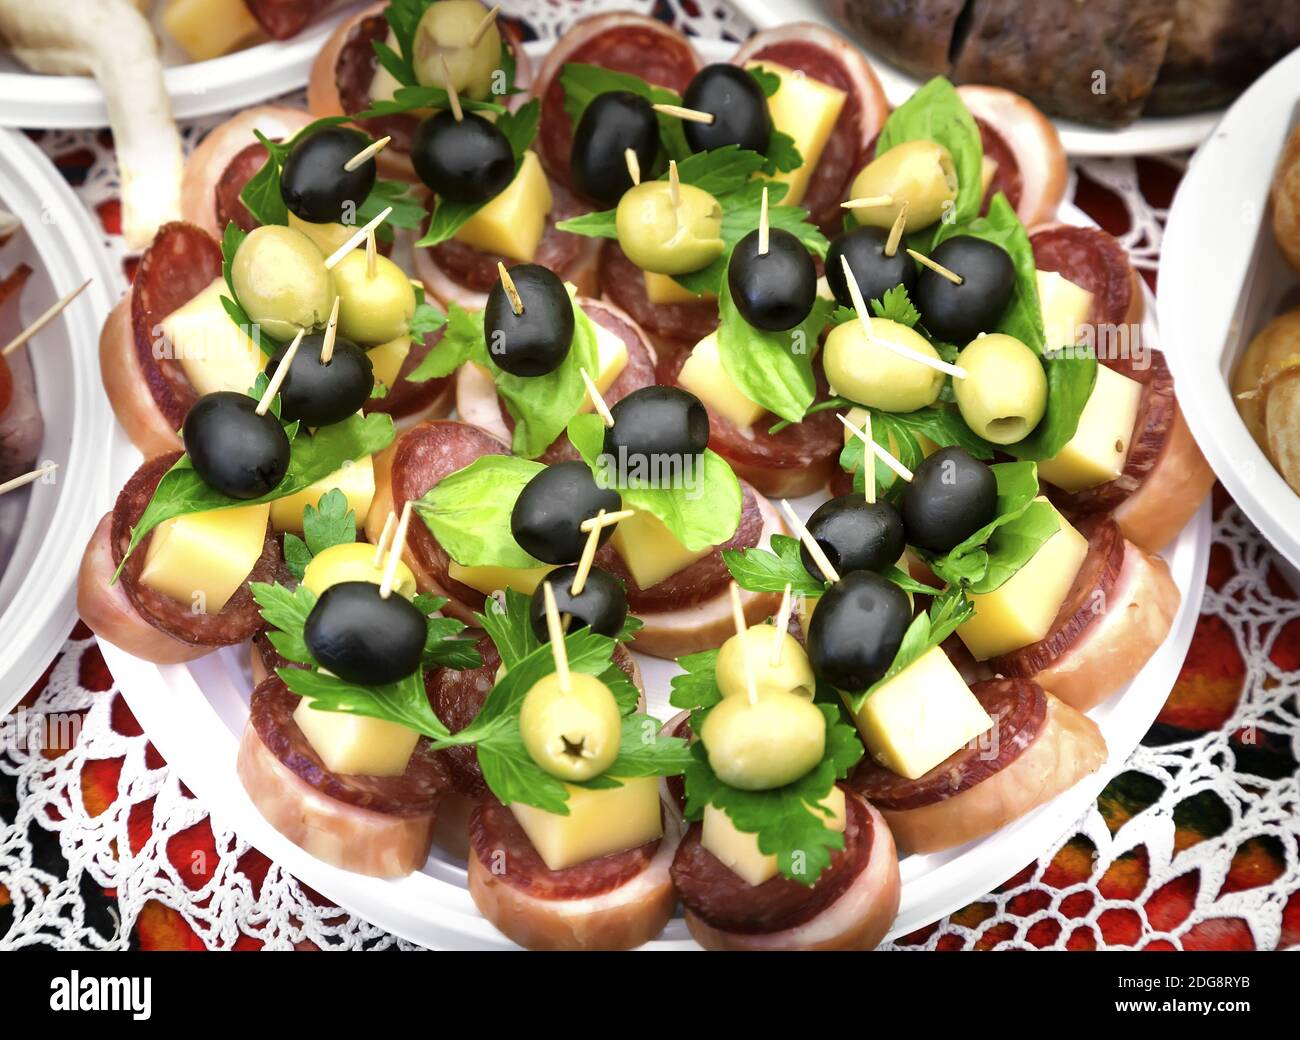 Sandwiches with cheese, sausage and olives. Stock Photo